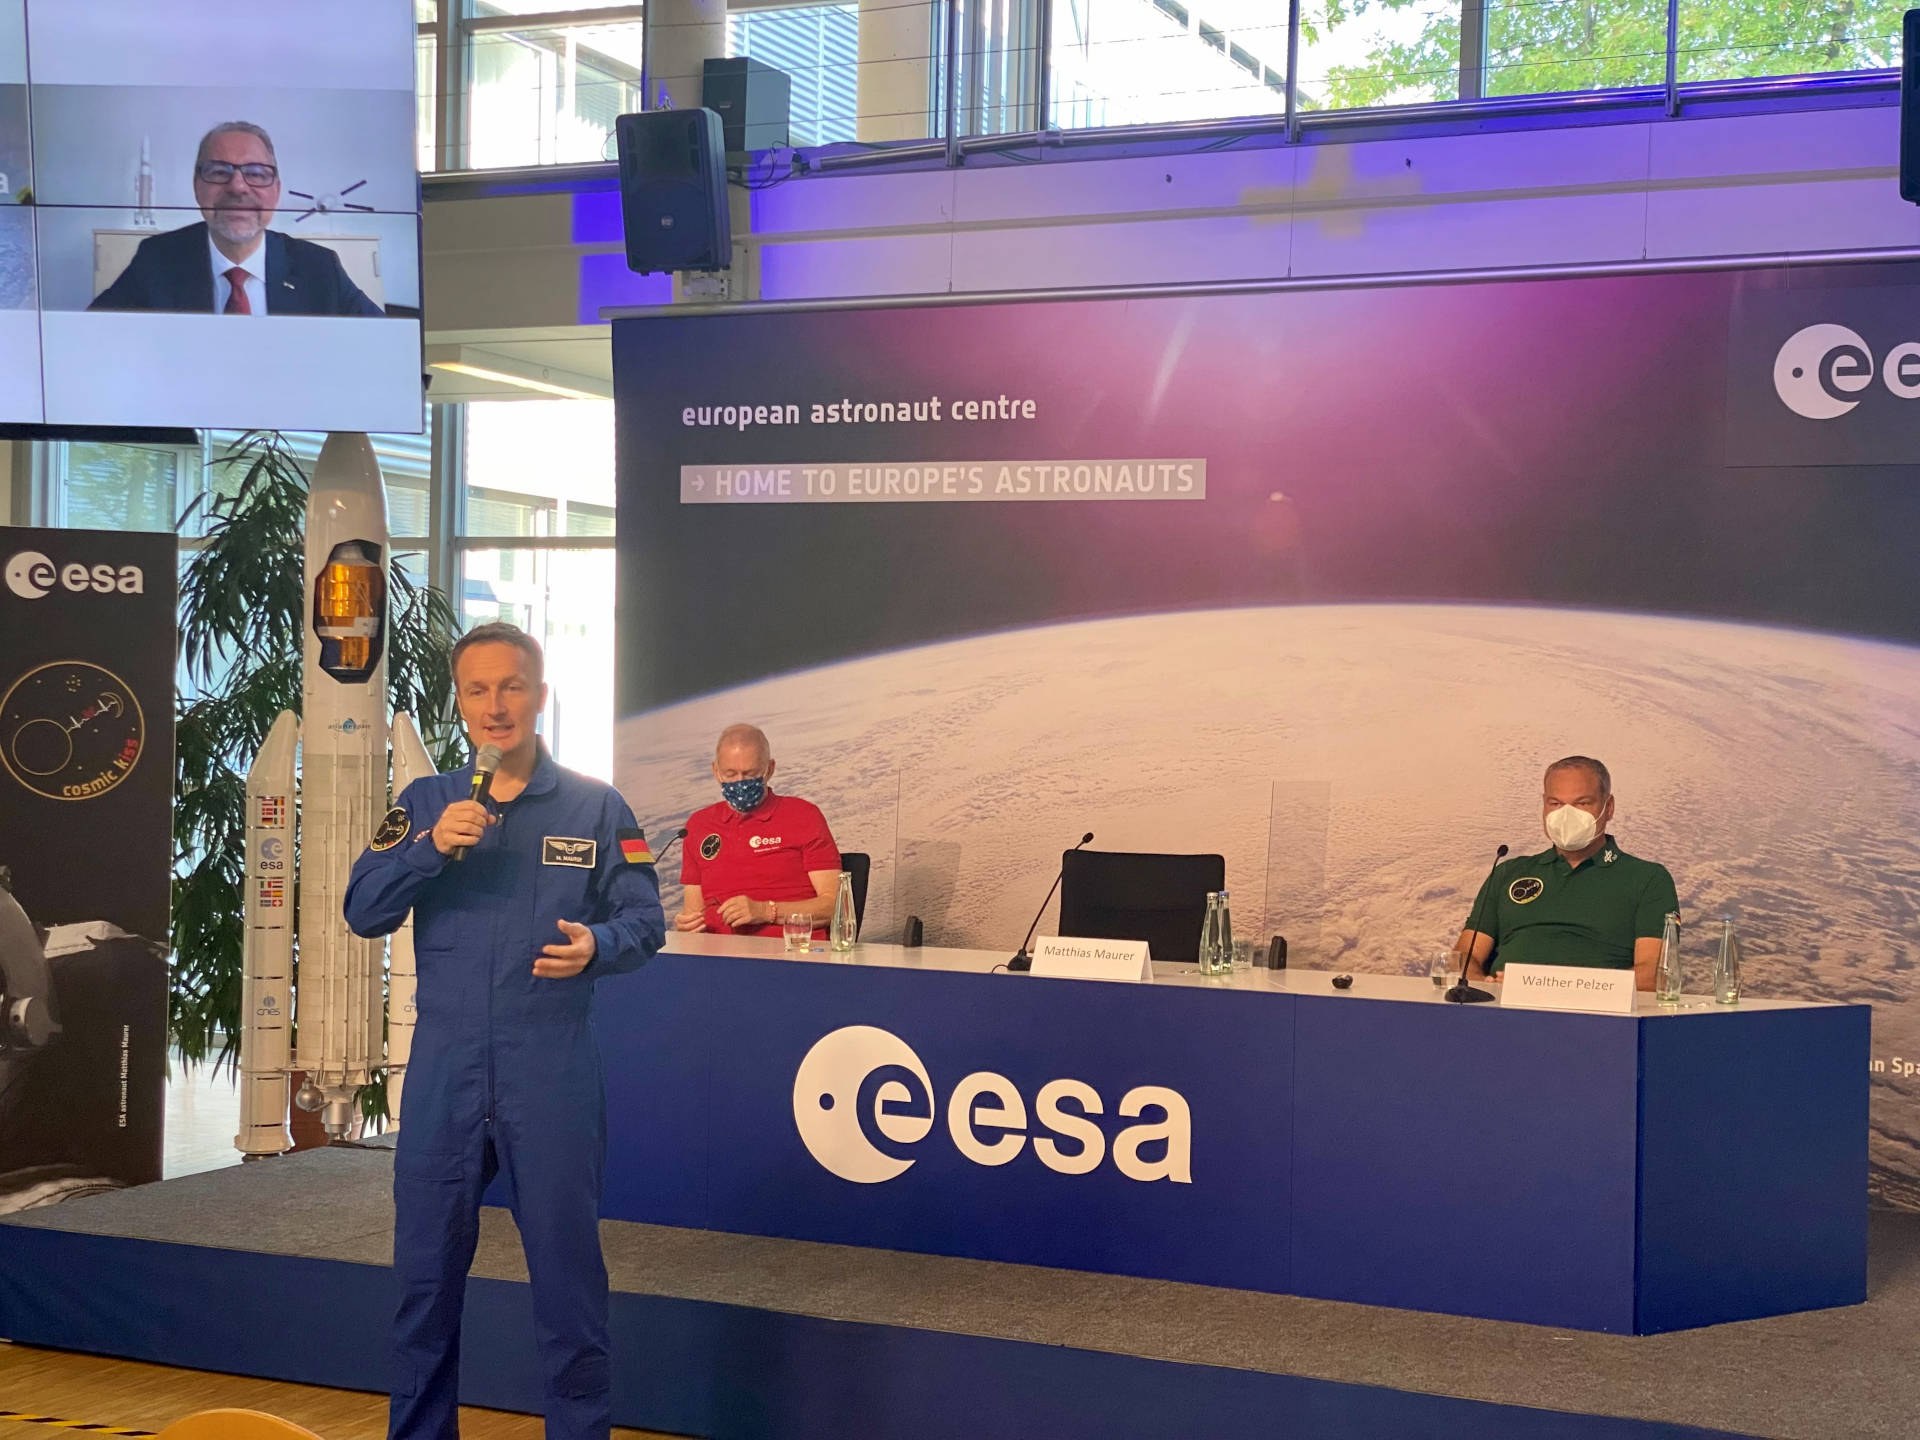 German ESA astronaut Matthias Maurer at the press conference for his ISS mission 'Cosmic Kiss' at the European Astronaut Centre (EAC)